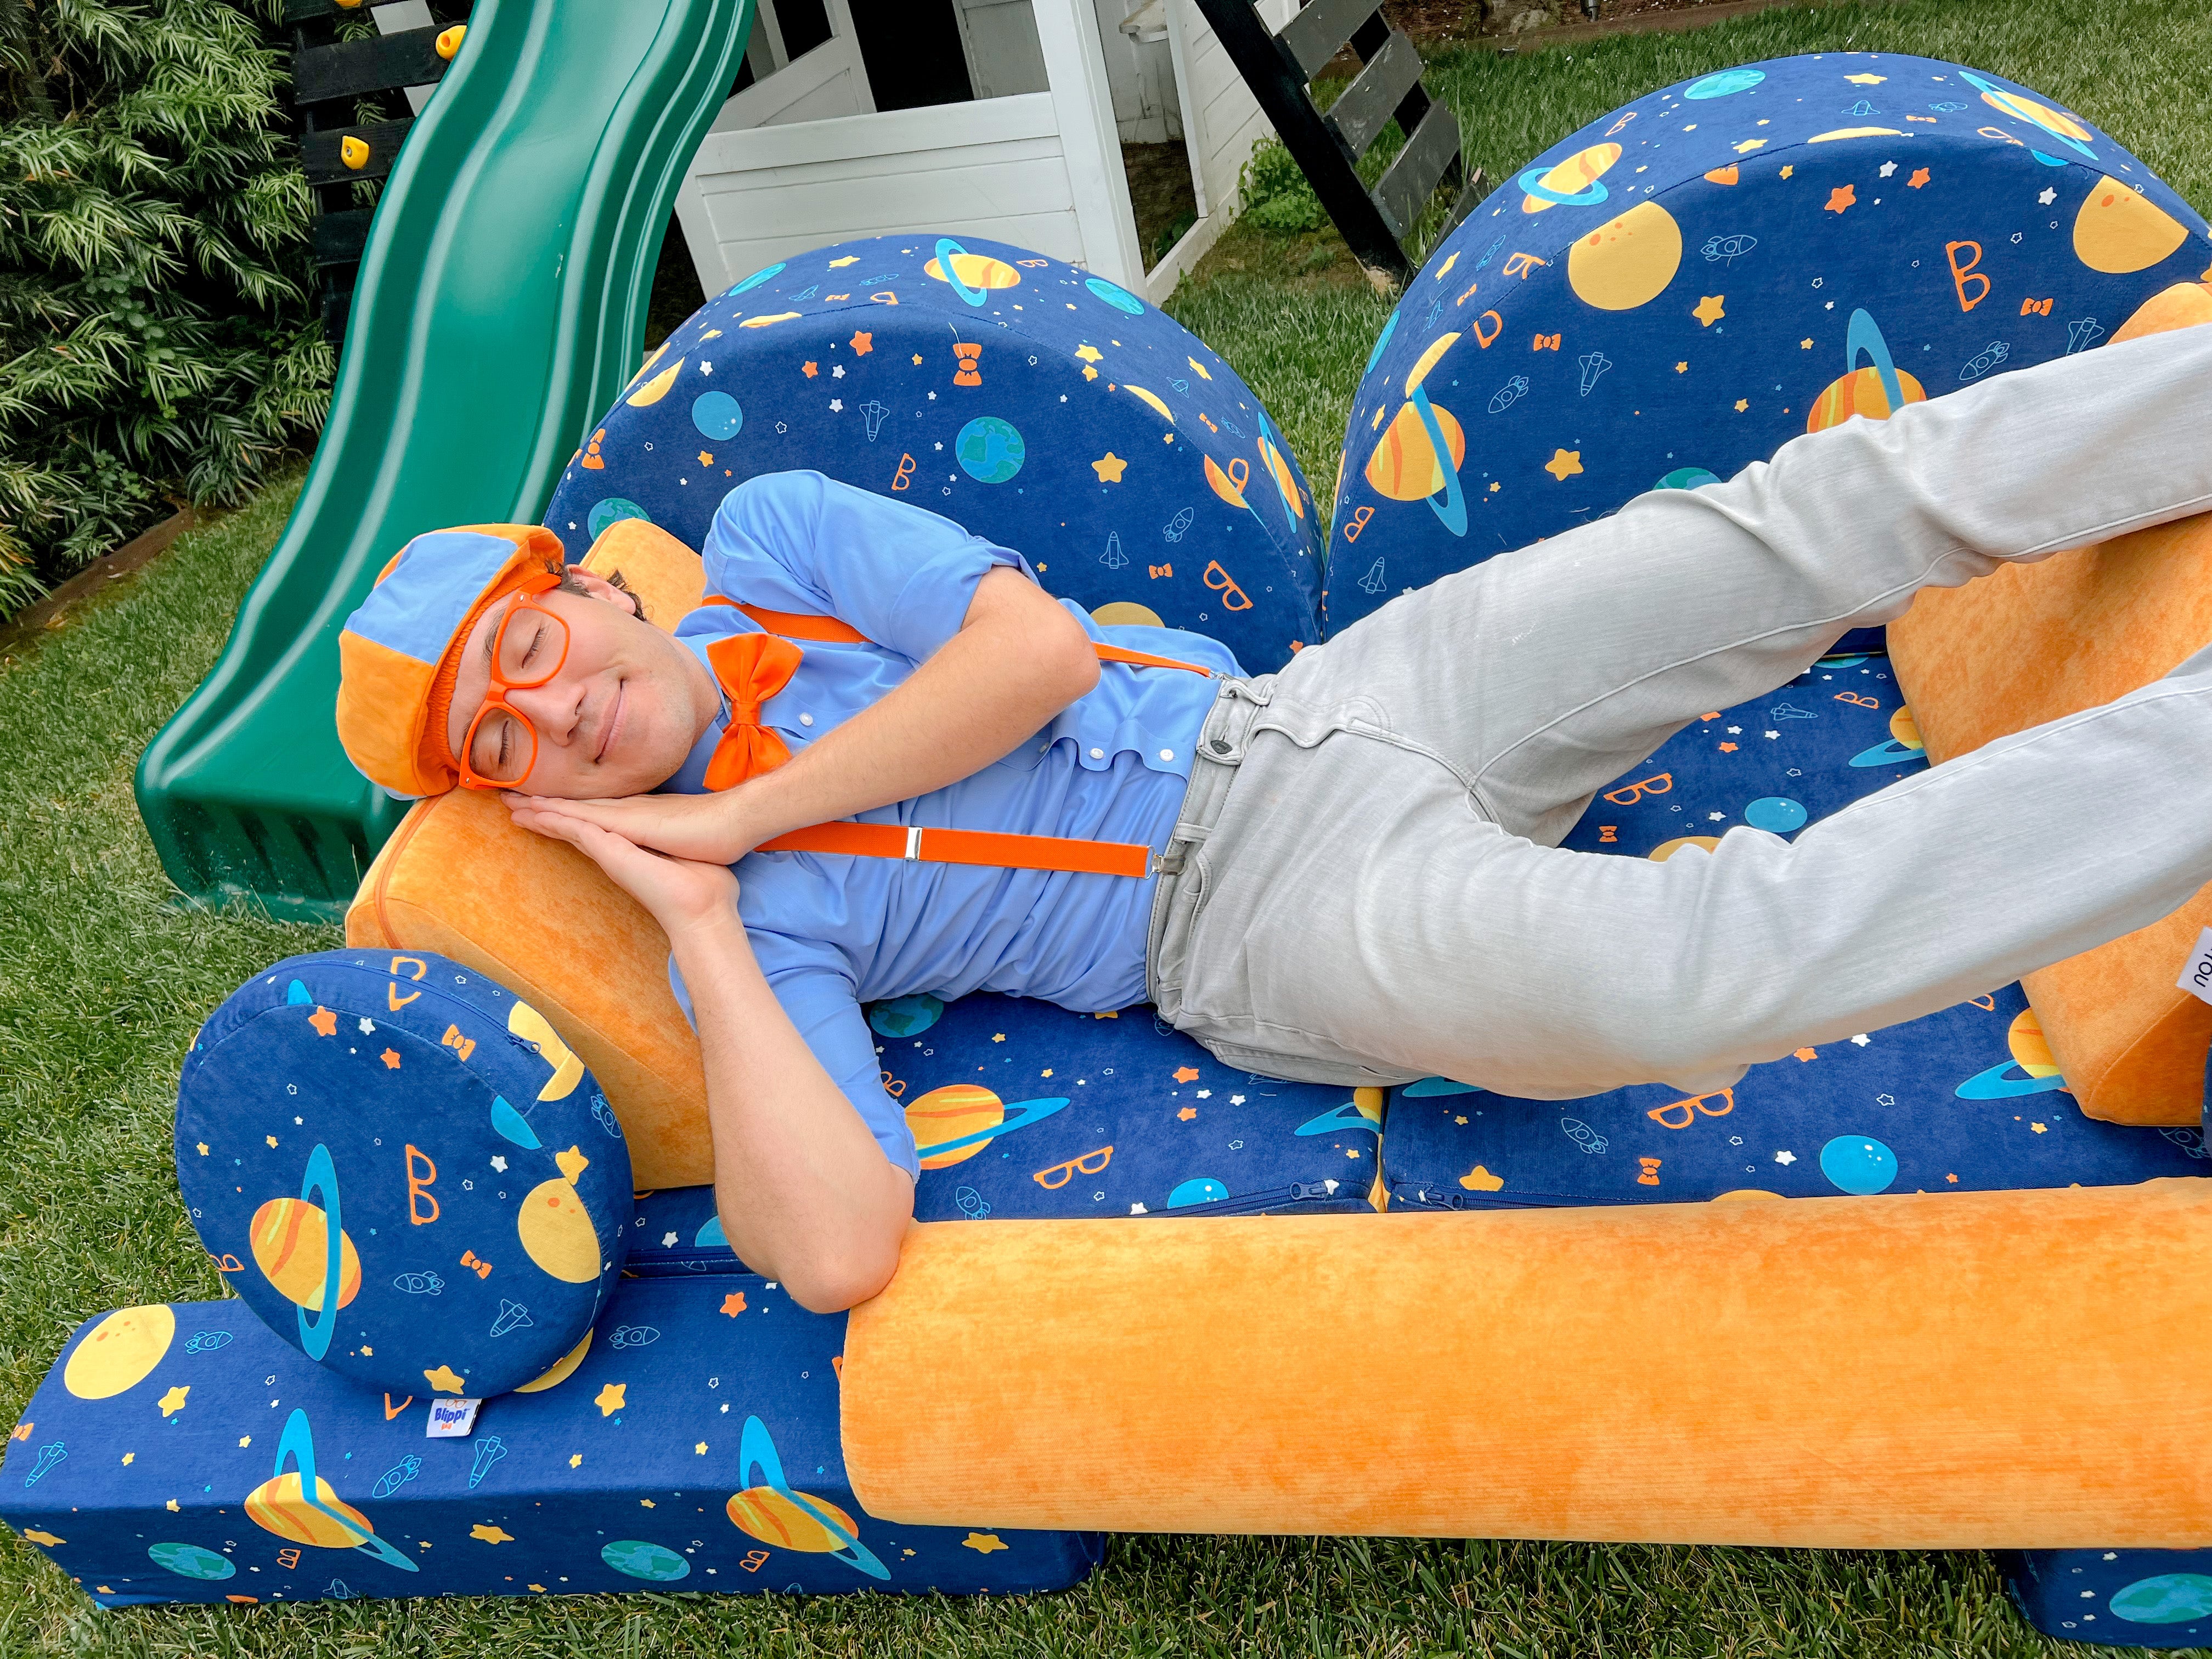 Blippi Sleeping on Space Joey Play Couch